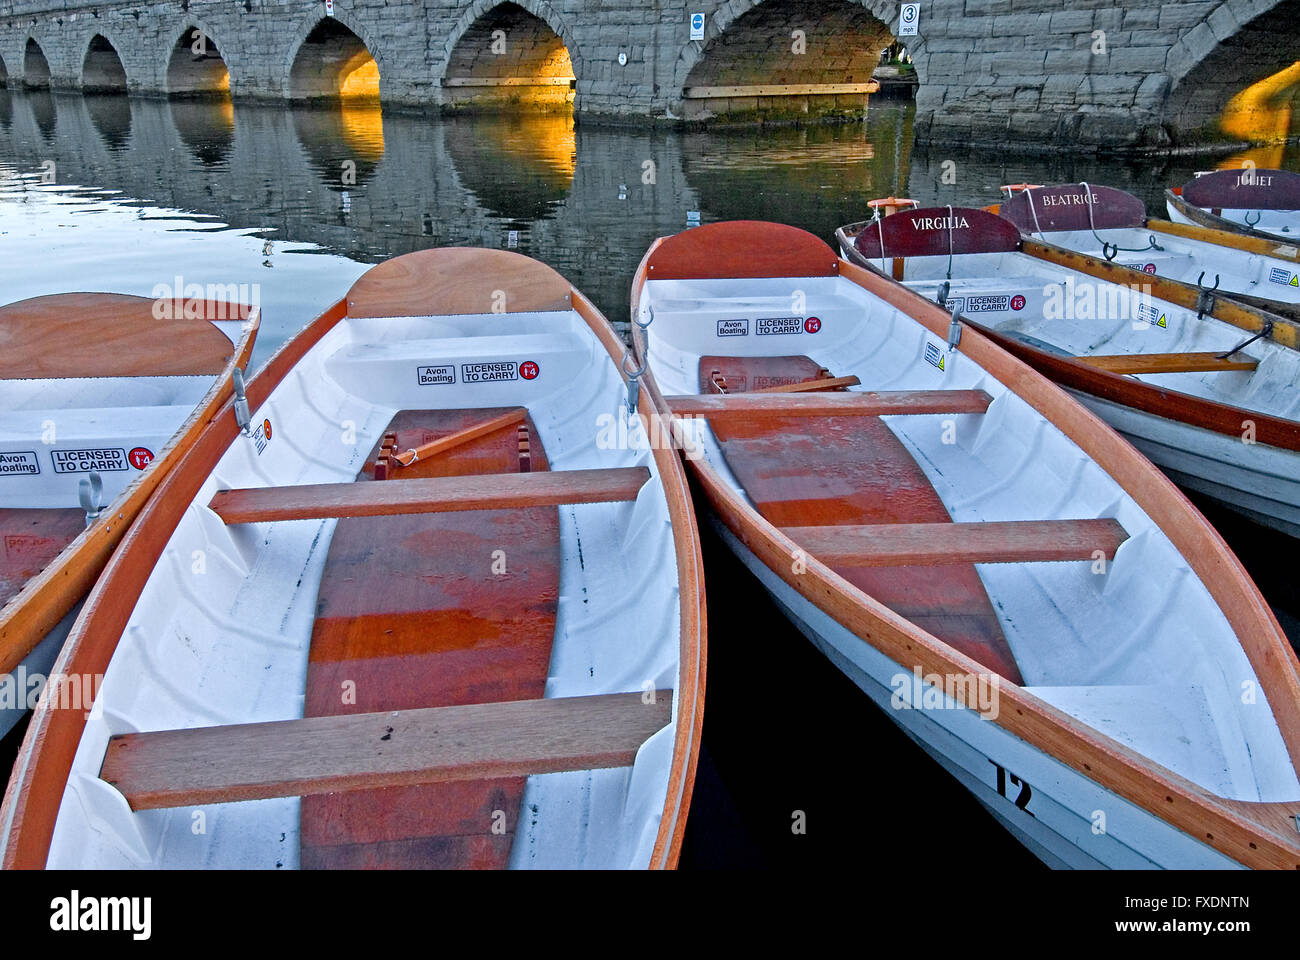 White day hire boats on the River Avon at Stratford upon Avon, Warwickshire with the stone arched Clopton Bridge in the background. Stock Photo